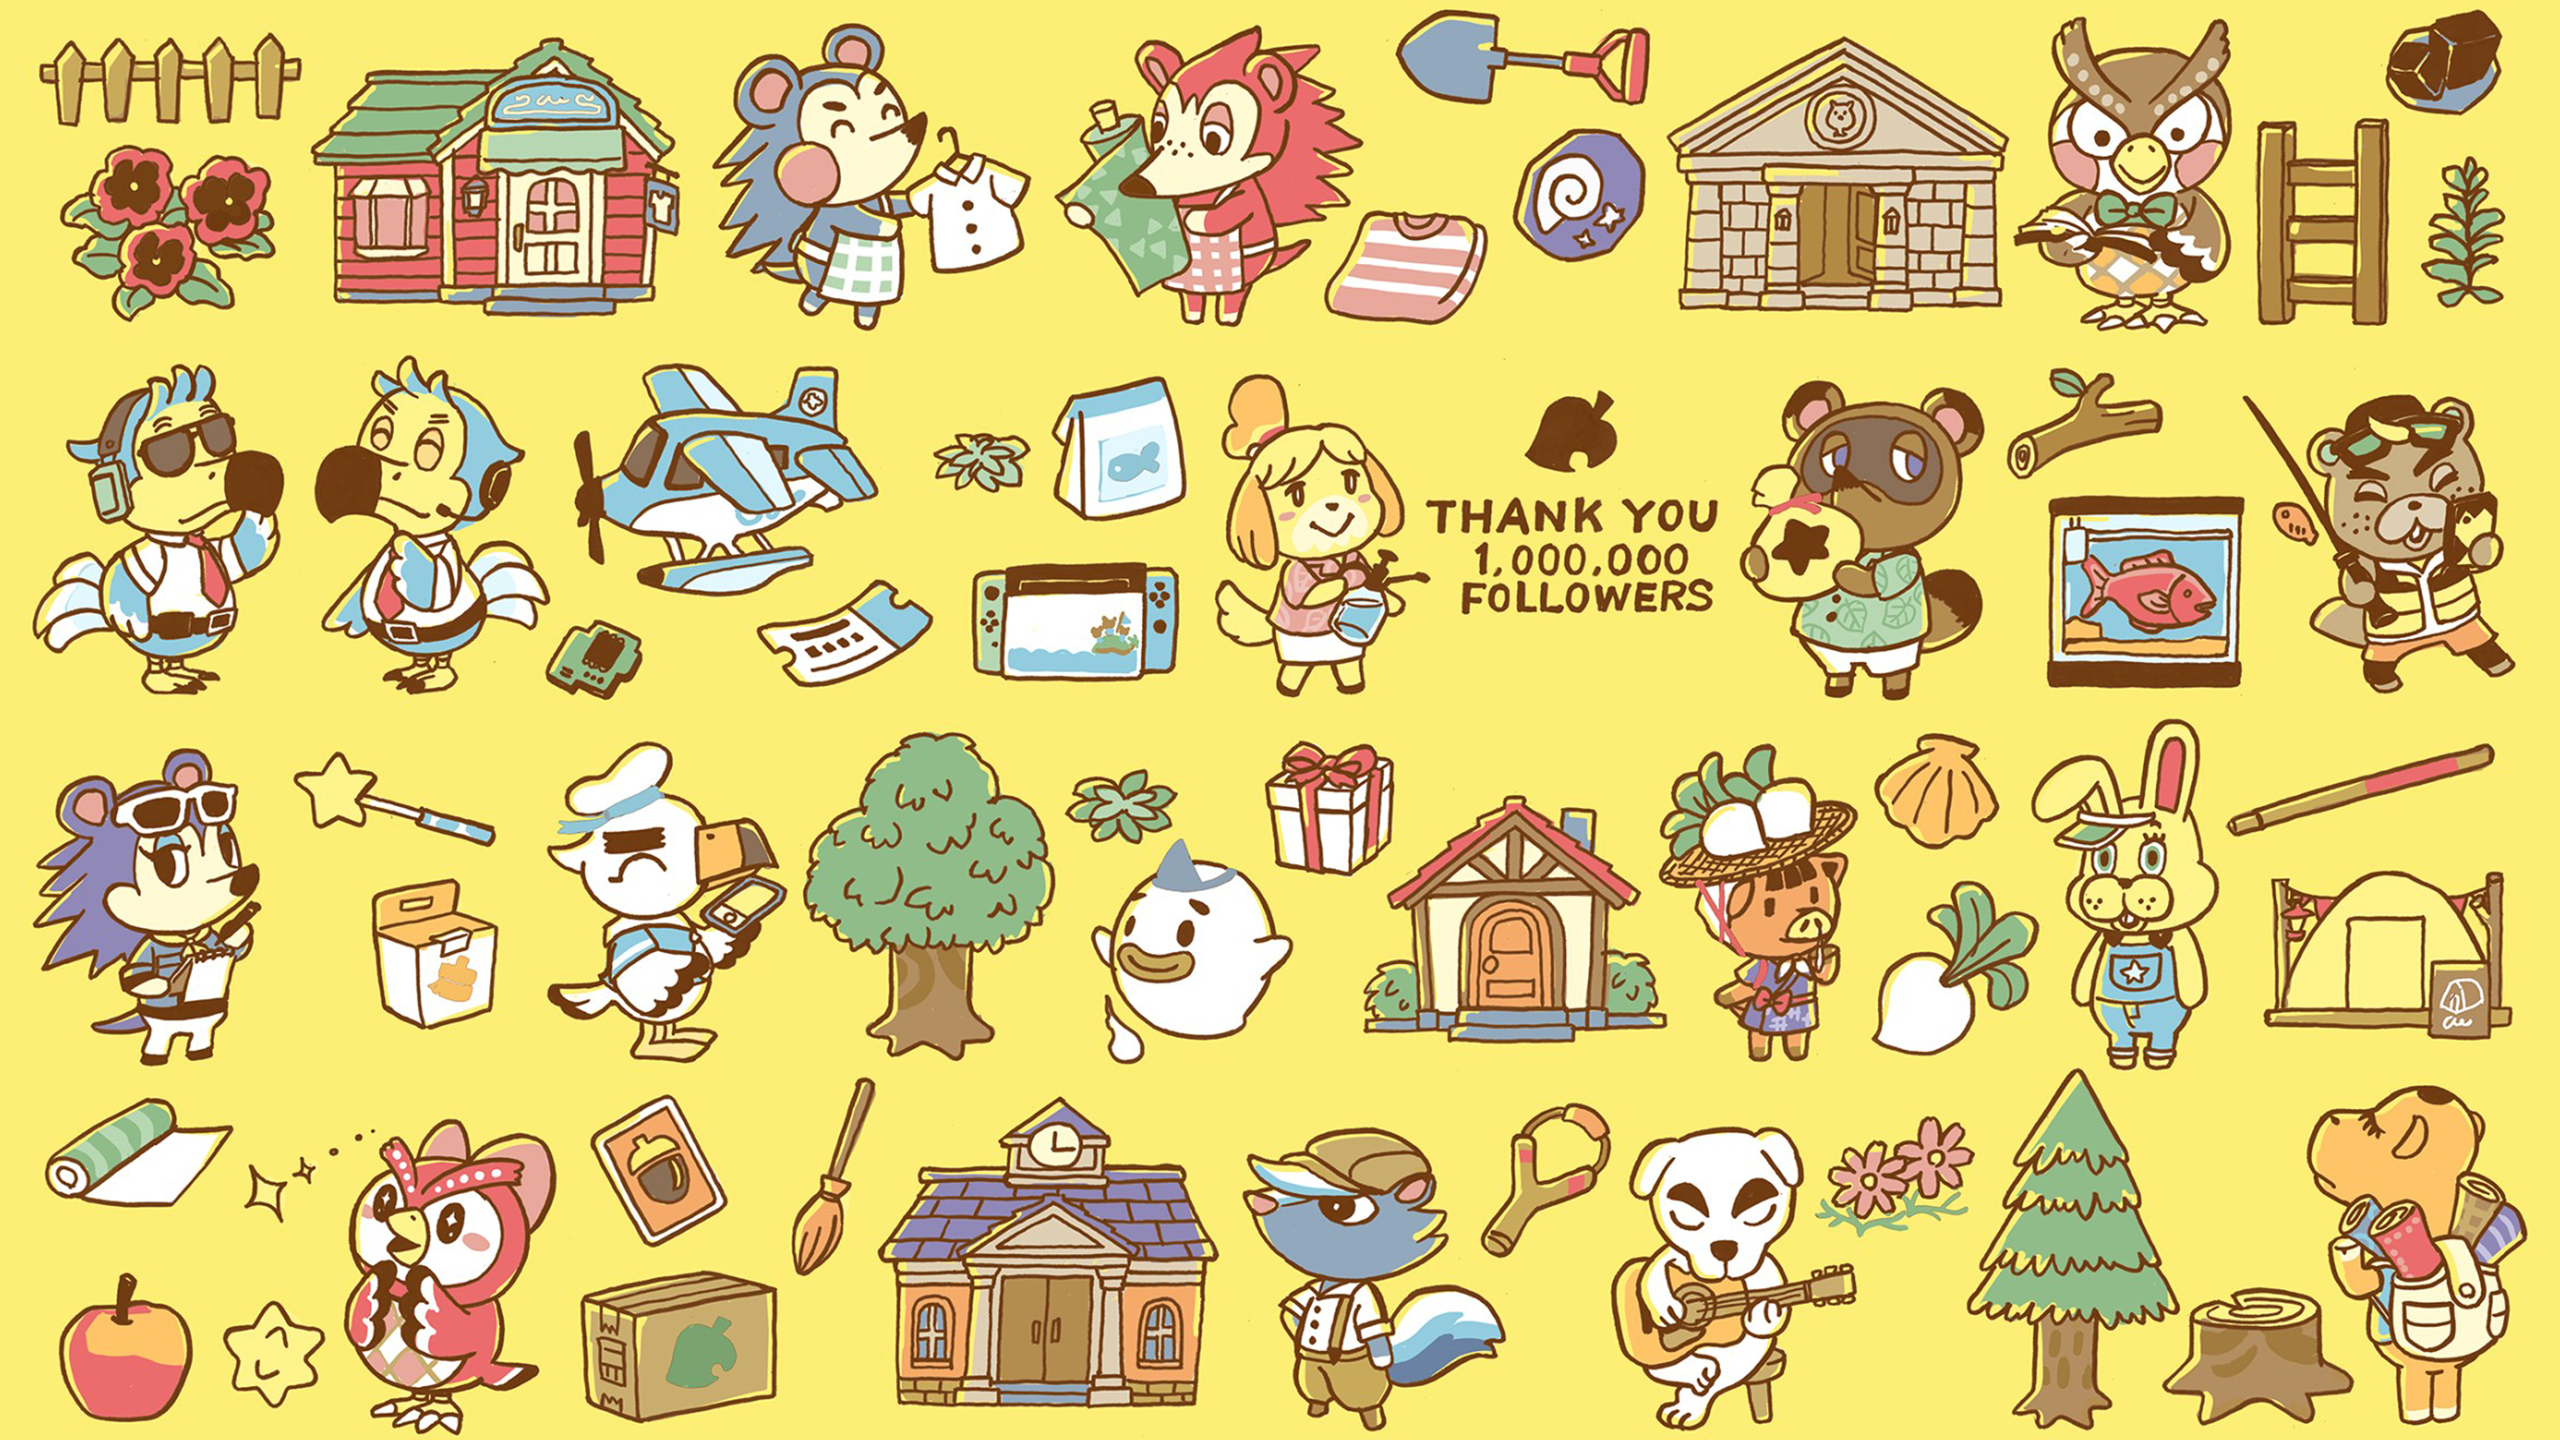 20 Animal Crossing New Horizons HD Wallpapers and Backgrounds